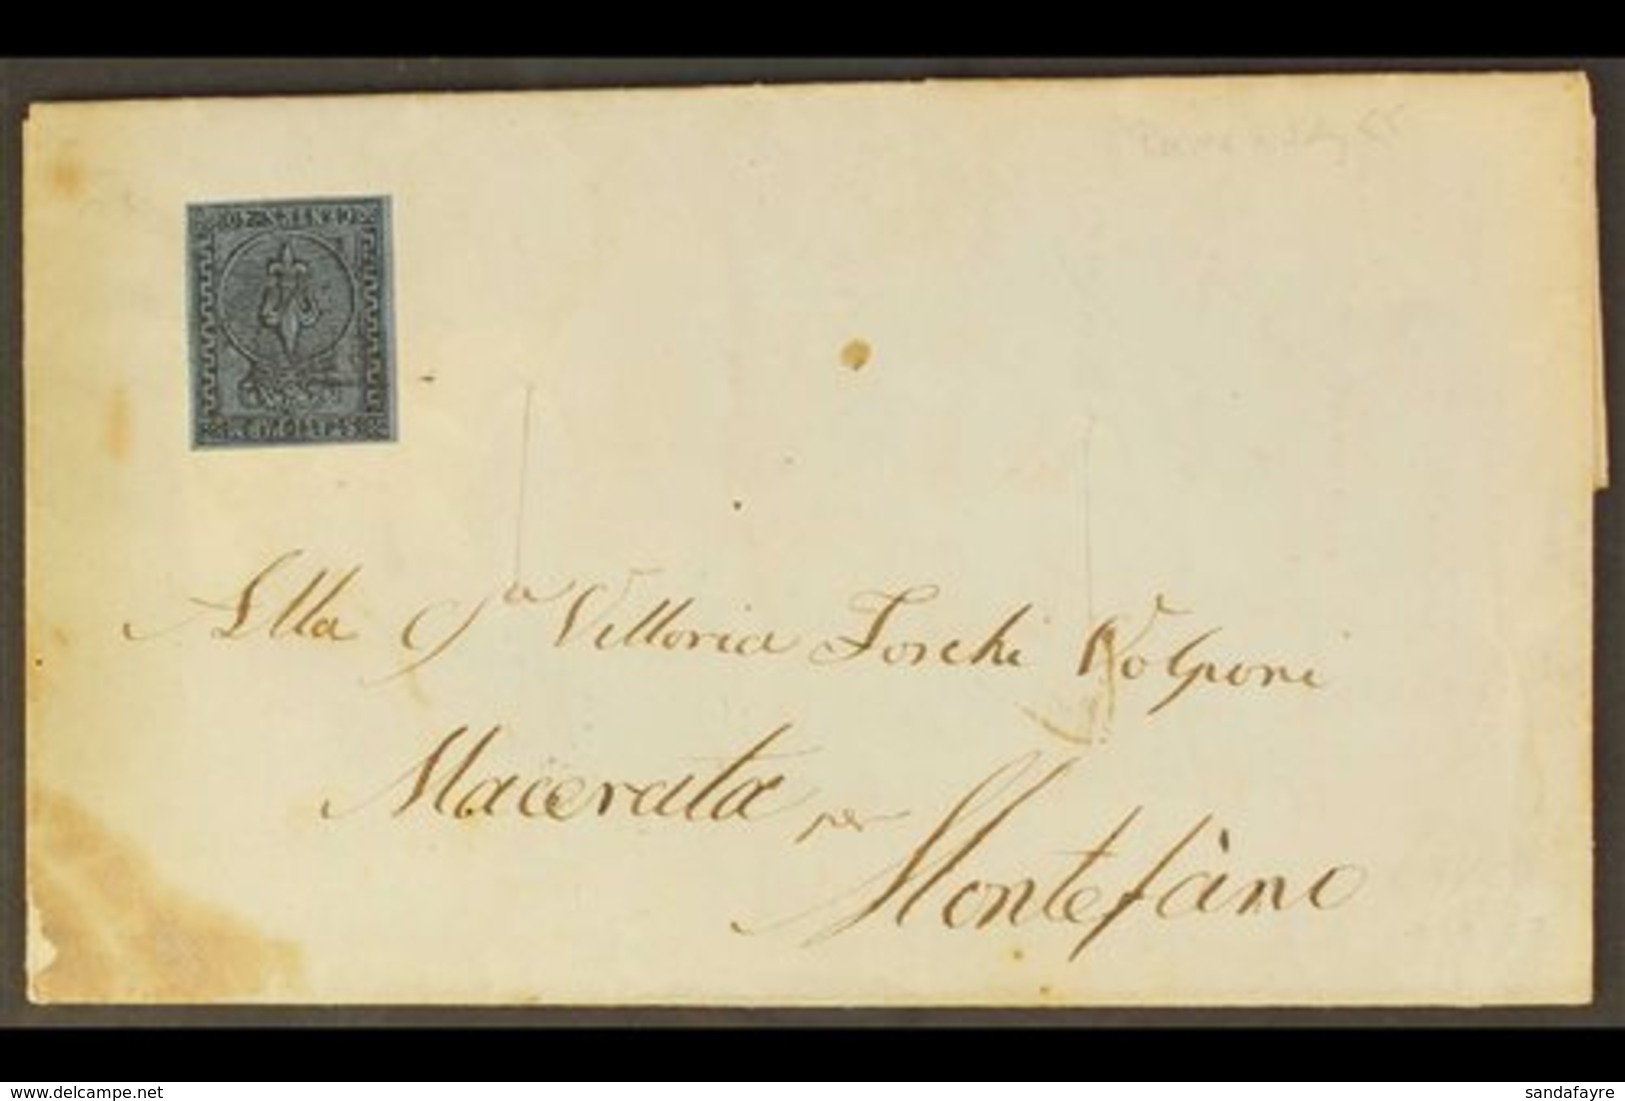 PARMA 1855, July Entire From Parma To Macerata, Franked Scarce 4 Margined 40c Blue, Sass 5, Tied By Barely Visible 3 Lin - Unclassified